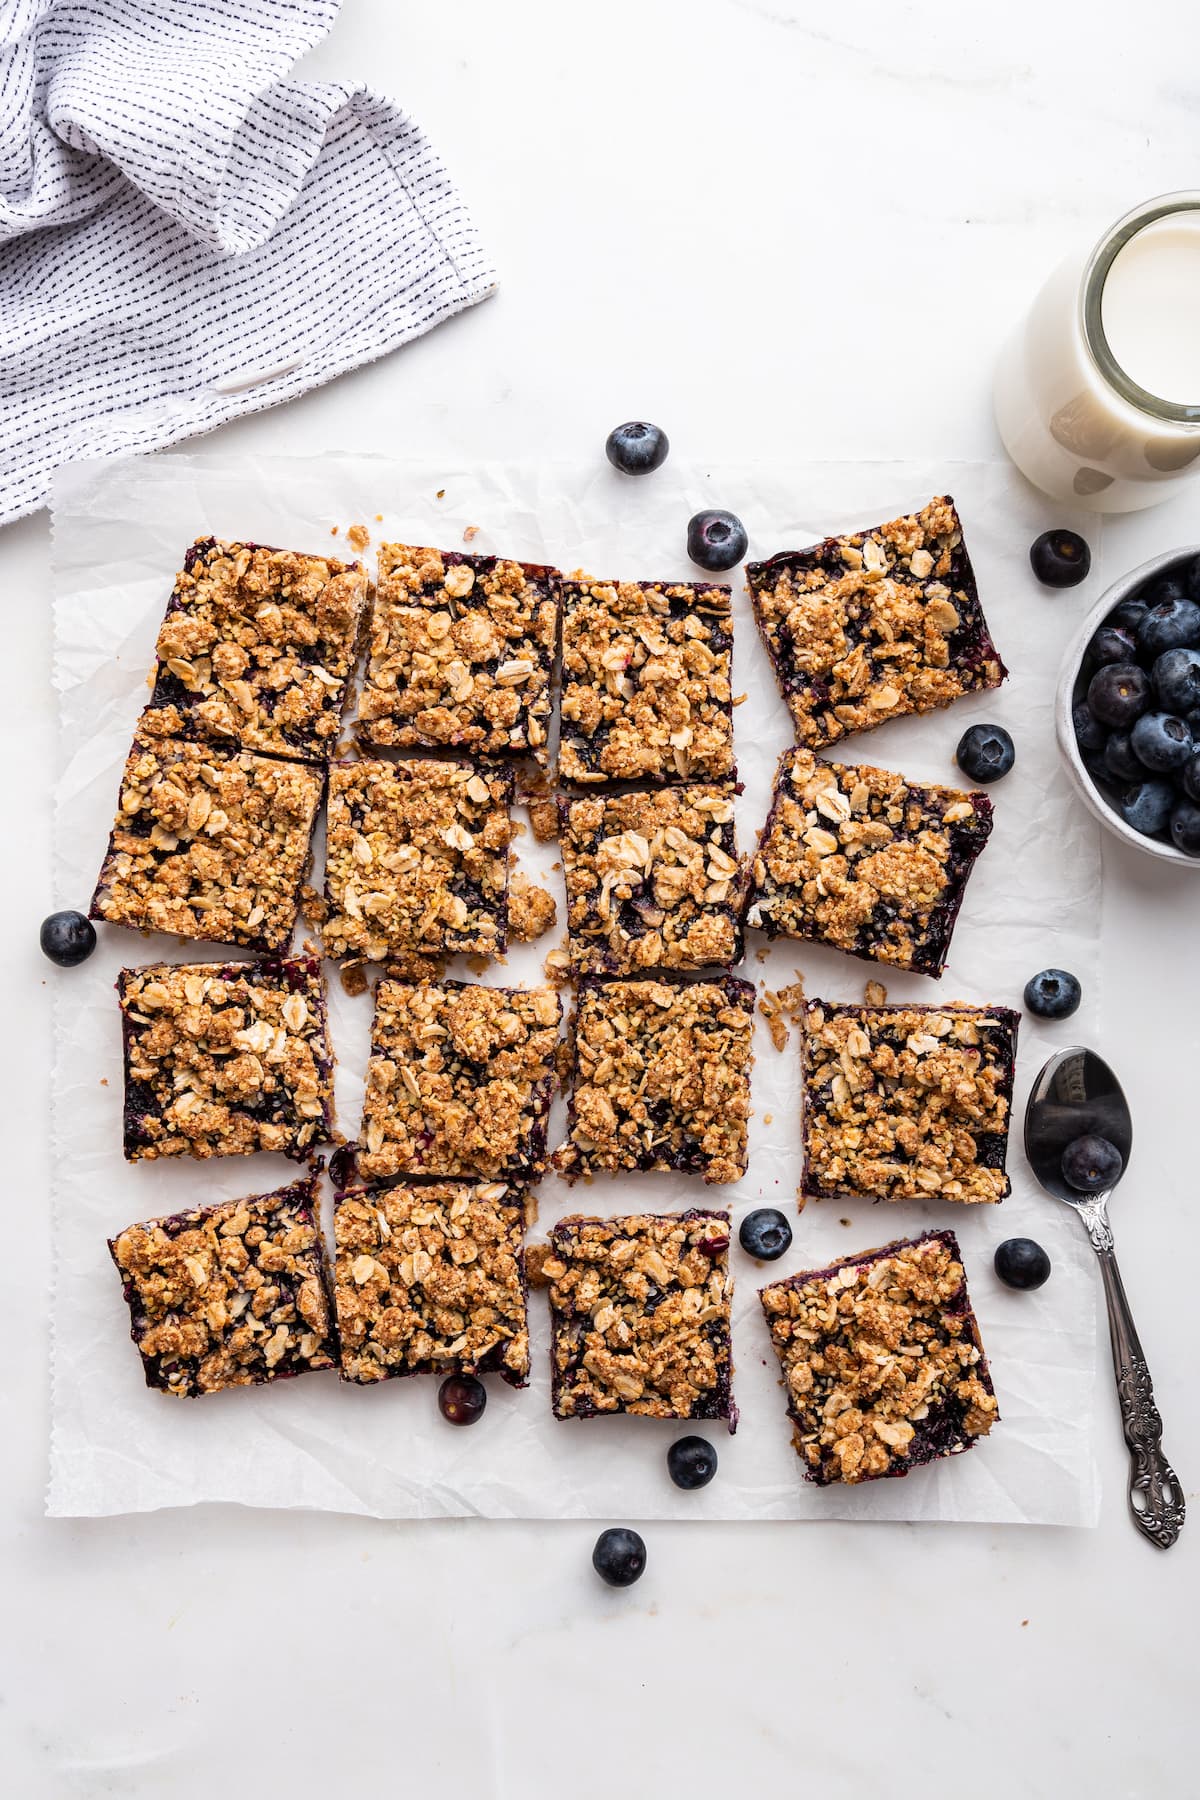 Healthy blueberry crumble bars on parchment paper.